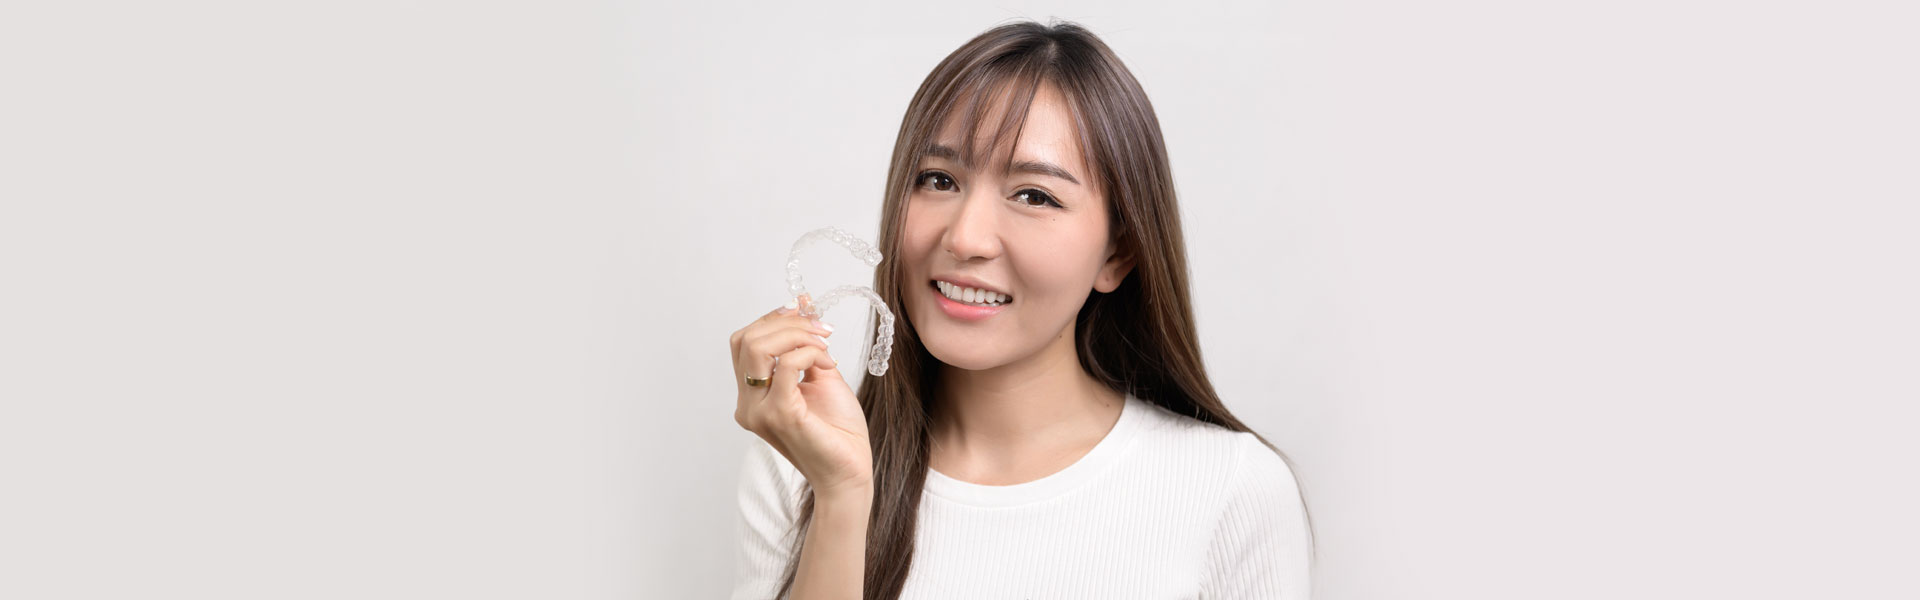 Invisalign Treatment: A Clear Solution for Straightening Teeth